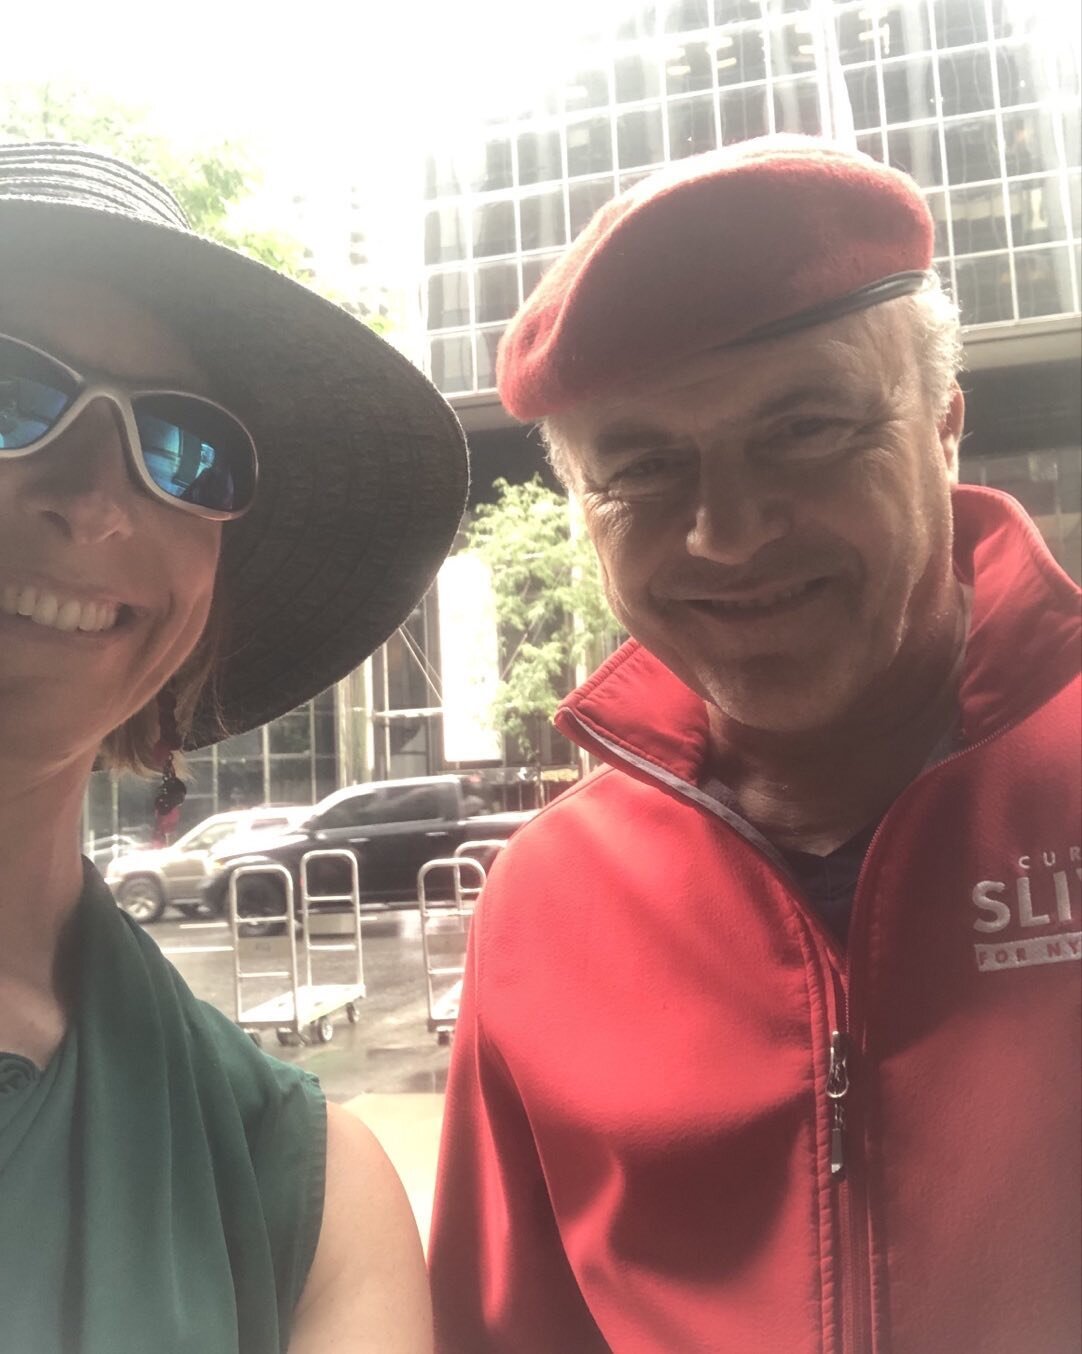 Just walked by Curtis Sliwa in the rain. Time for a selfie! #nyc #celebs